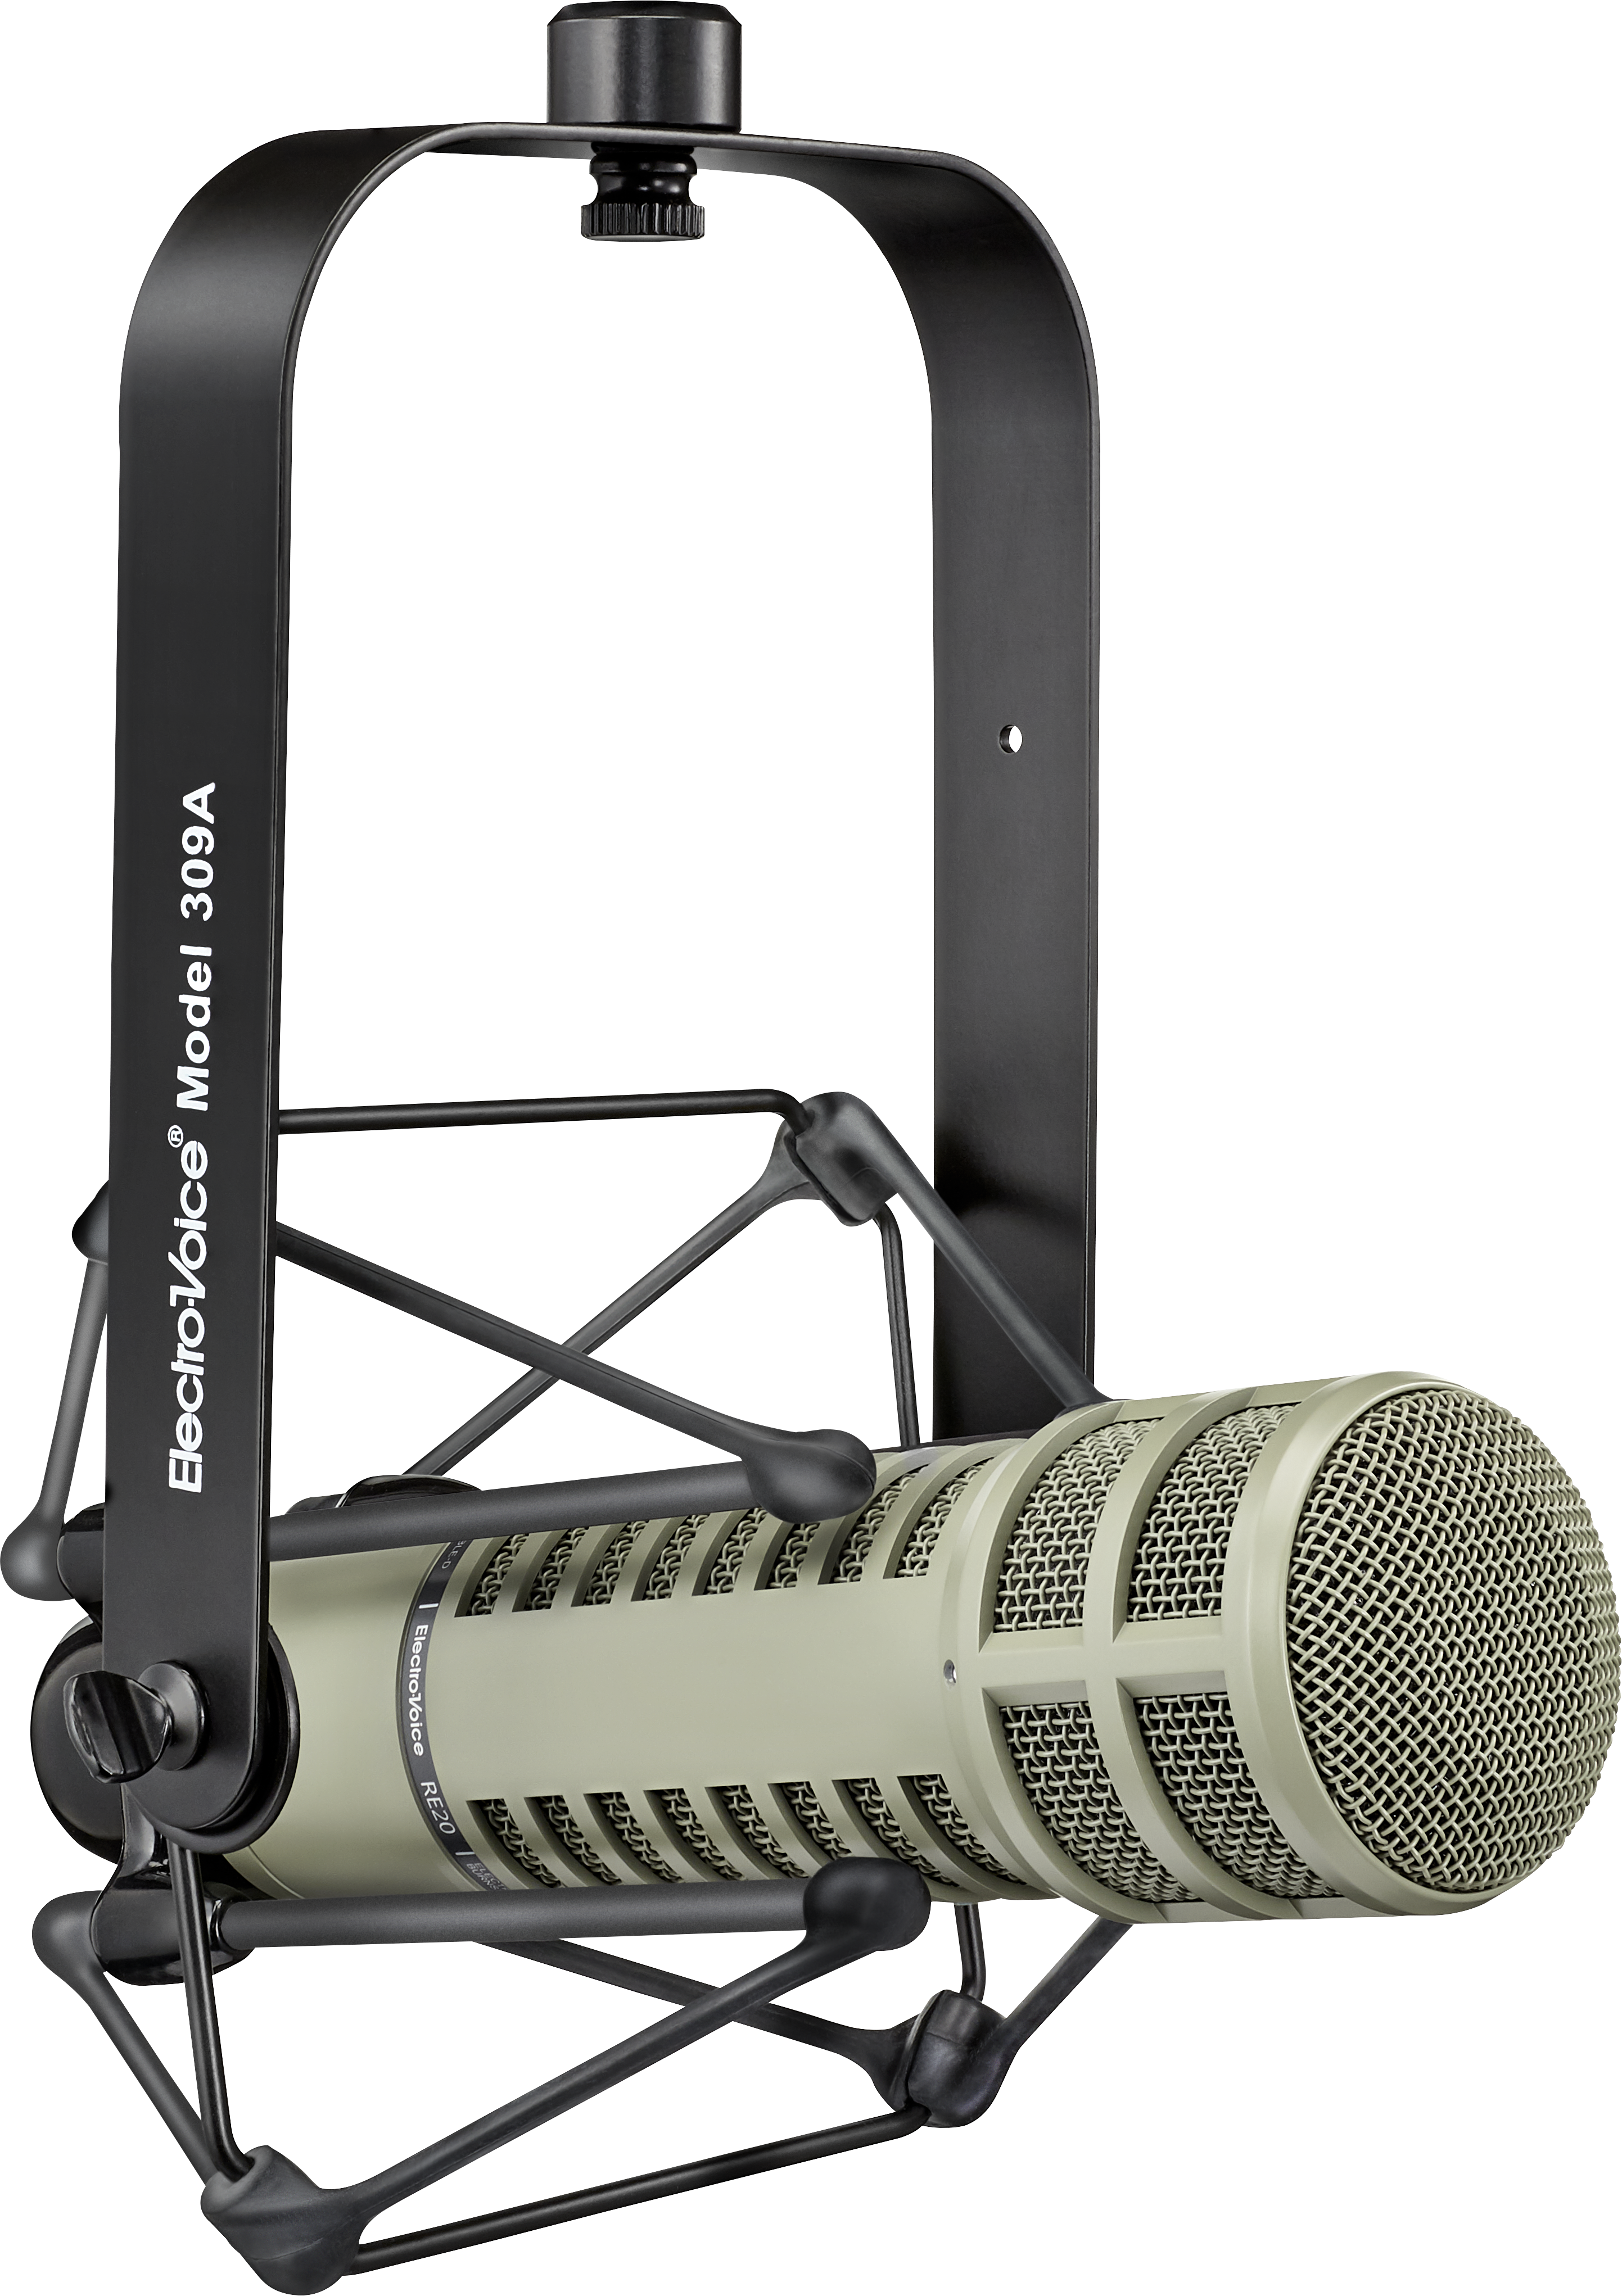 Electro-Voice RE20 Variable-D Dynamic Cardioid Microphone 45-18000Hz Frequency Response 150 Ohms Impedance On-Stage MBS5000 Broadcast Arm with XLR Cable H&A Microphone Suspension Shockmount 